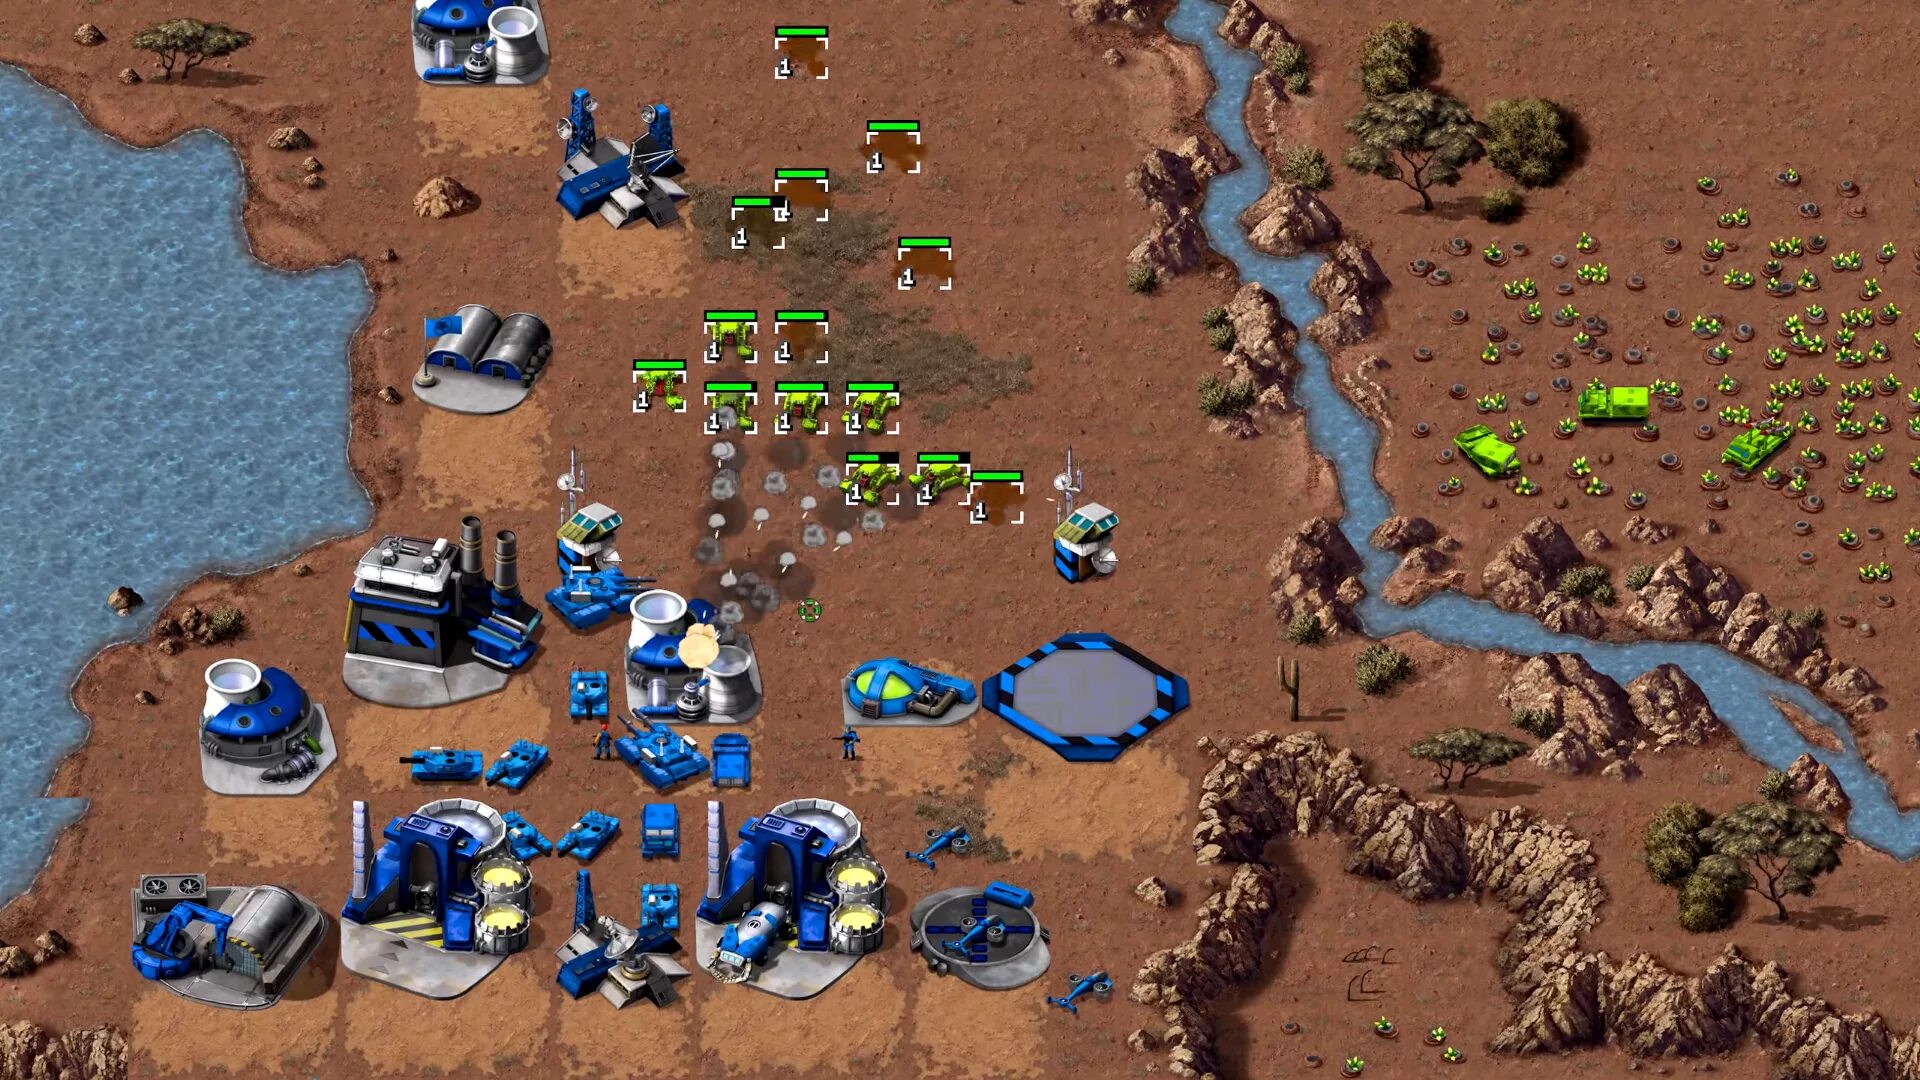 Command and Conquer Remastered. Command and Conquer Remastered 2020. Command and Conquer 1995 Remaster. Command & Conquer Remastered collection.